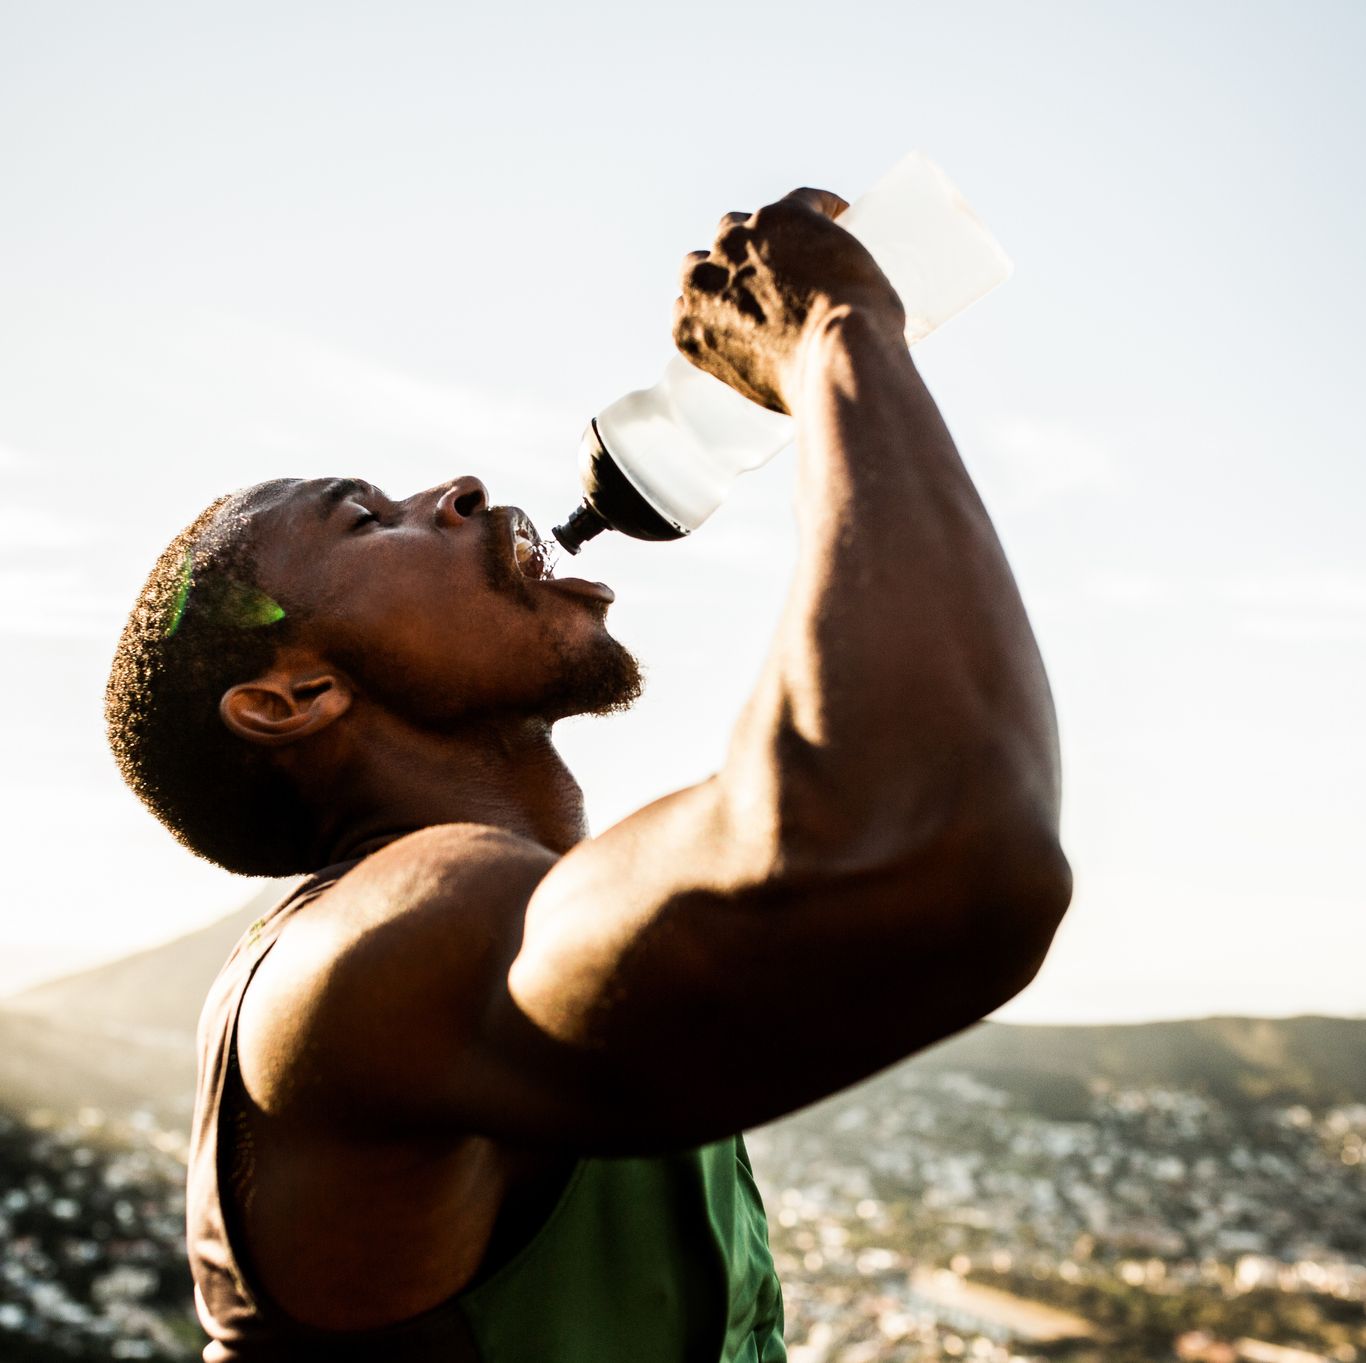 Do Electrolytes Help You Work Out in the Heat?